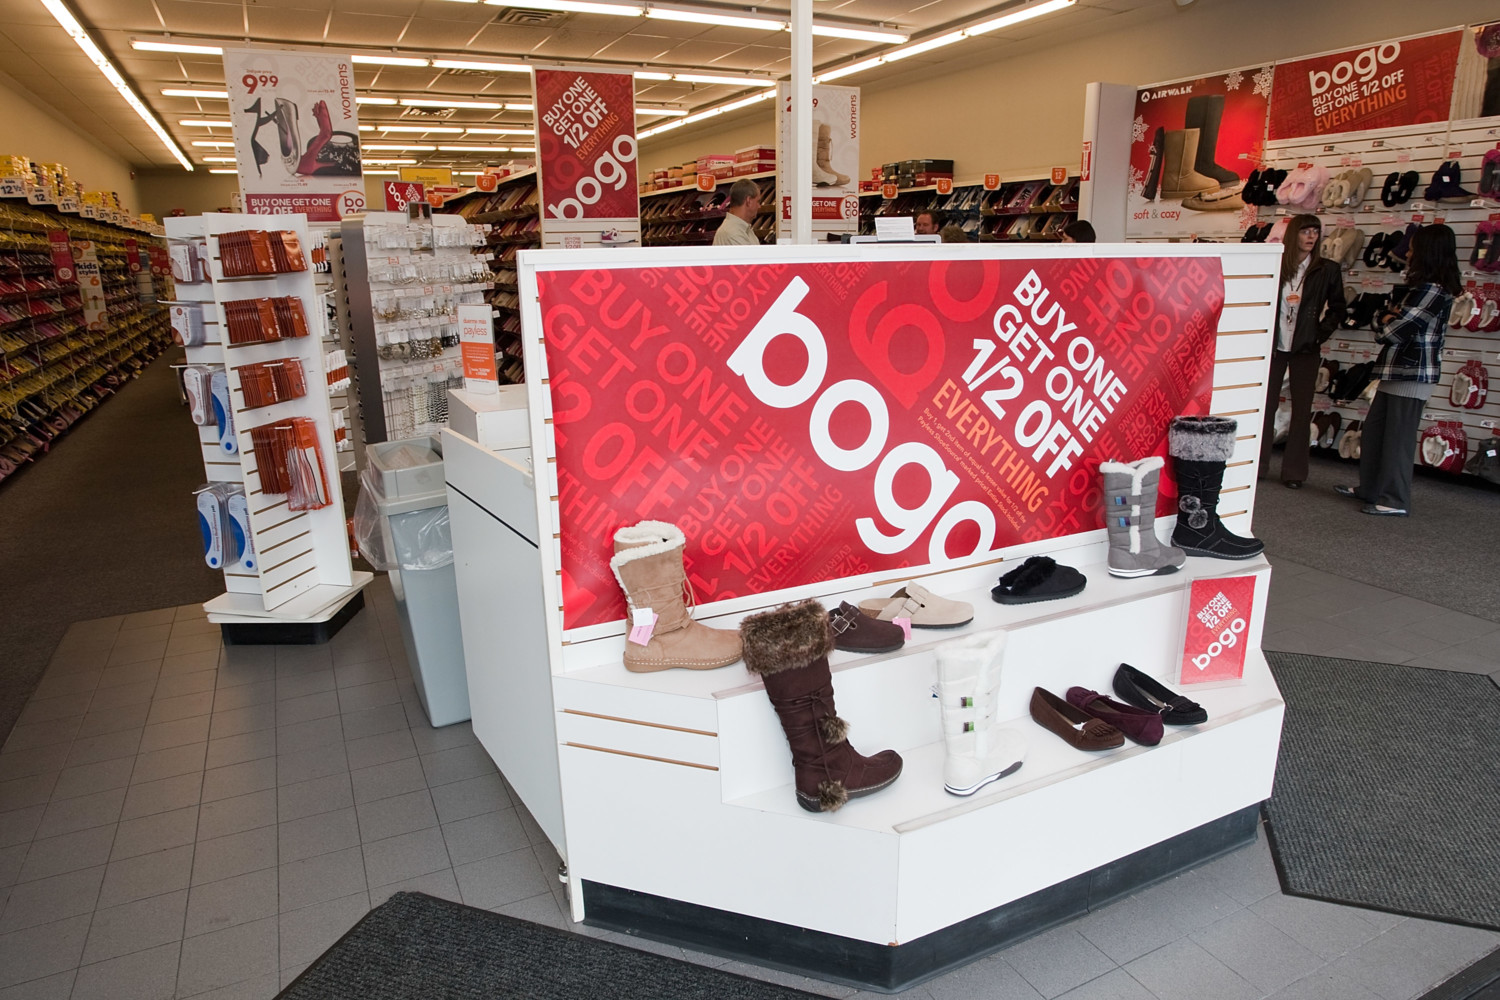 payless shoes photo